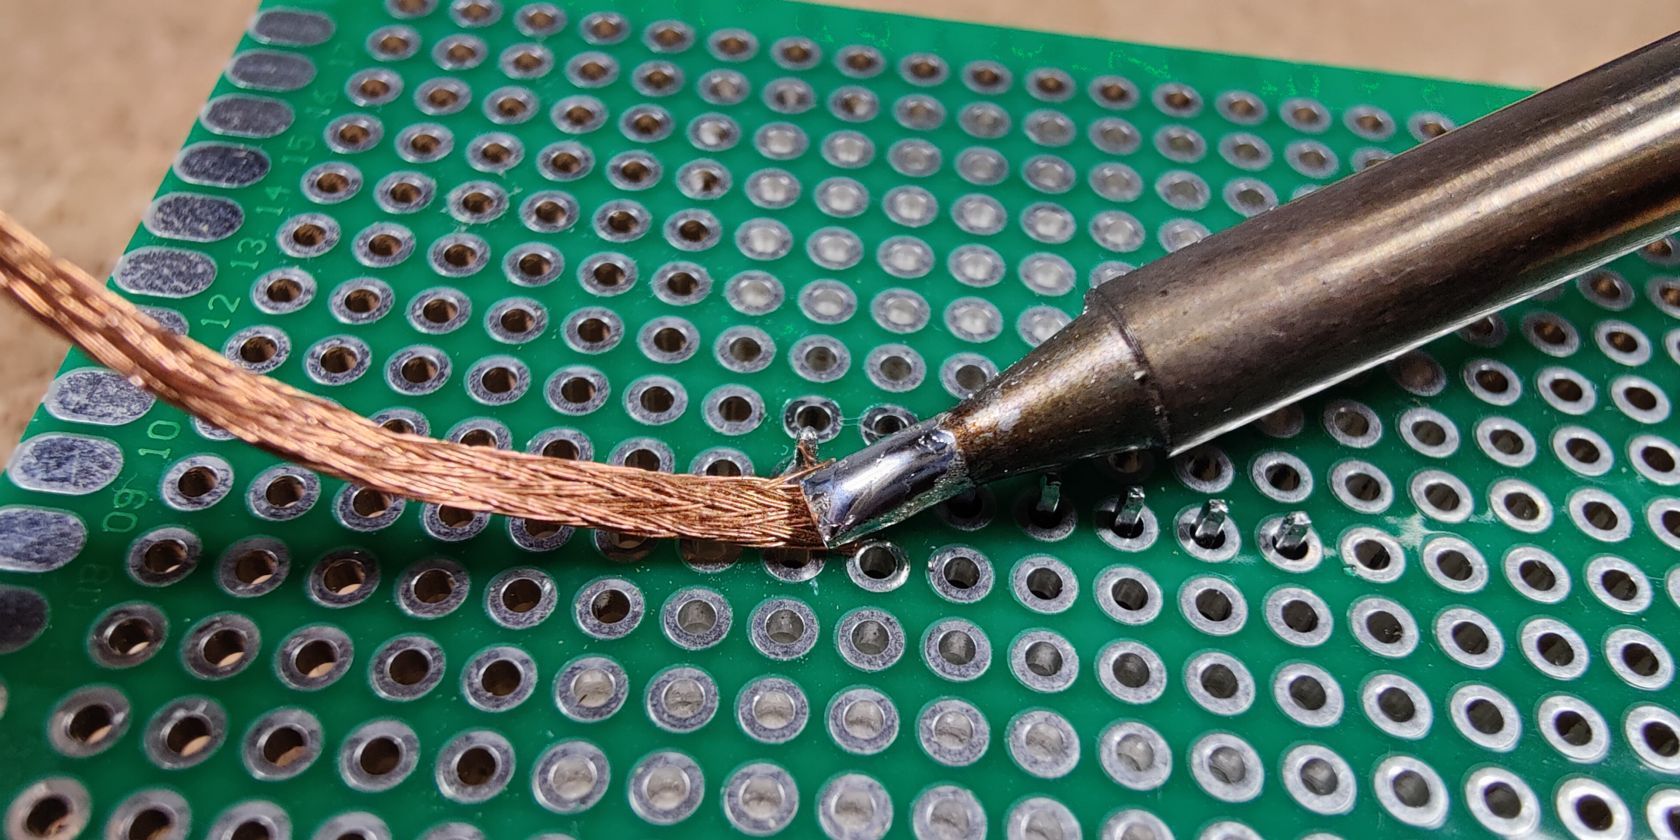 Desoldering PTH joints with a solder wick and soldering iron